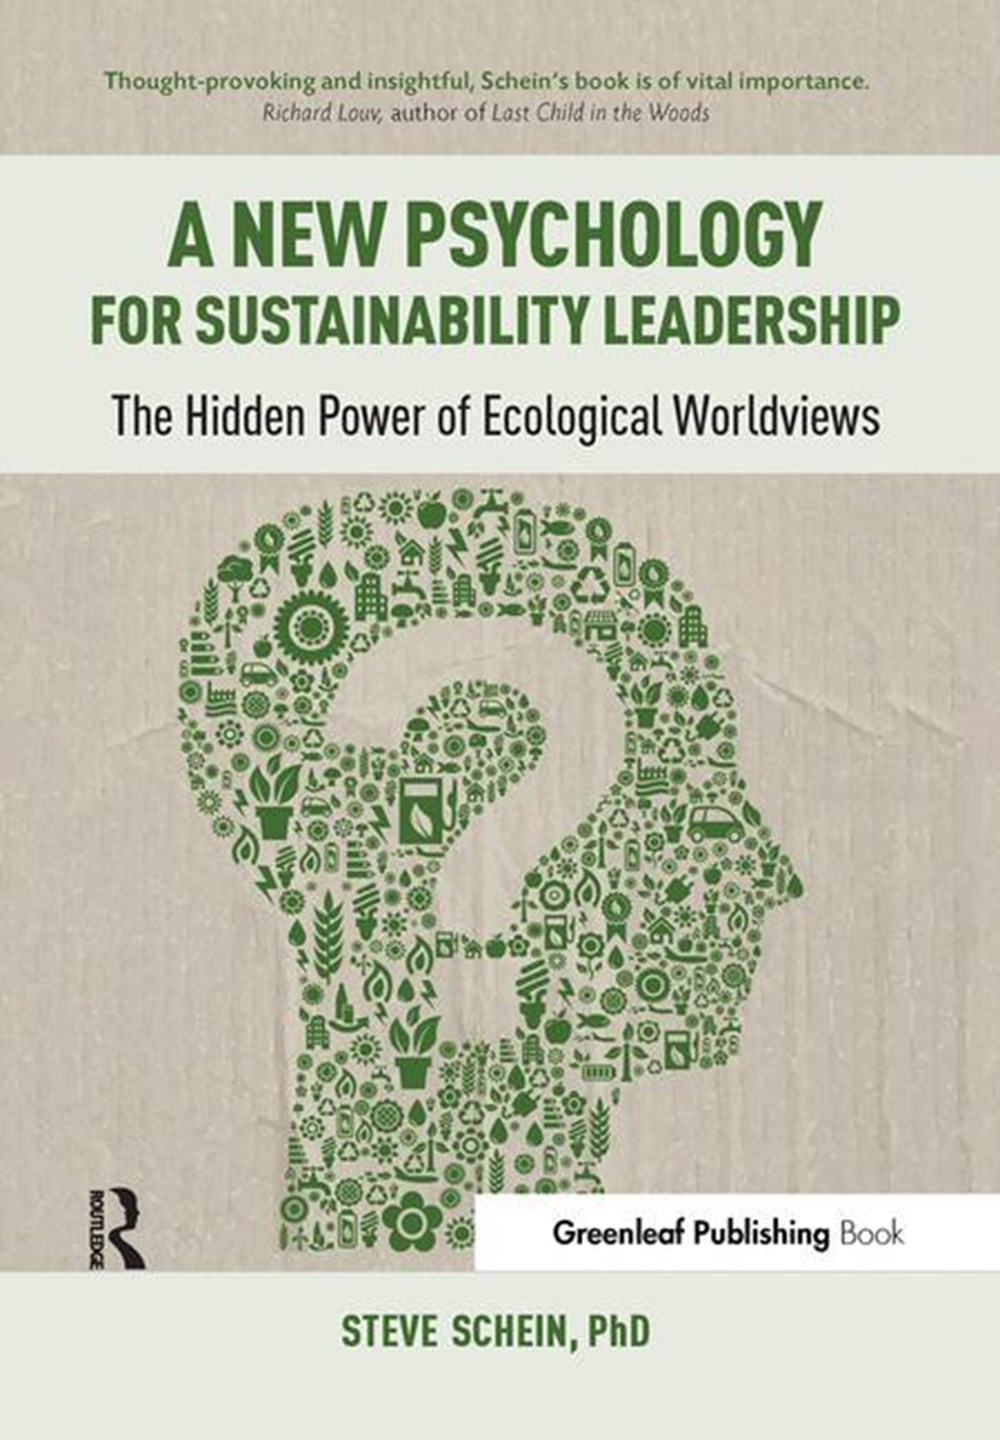 New Psychology for Sustainability Leadership: The Hidden Power of Ecological Worldviews